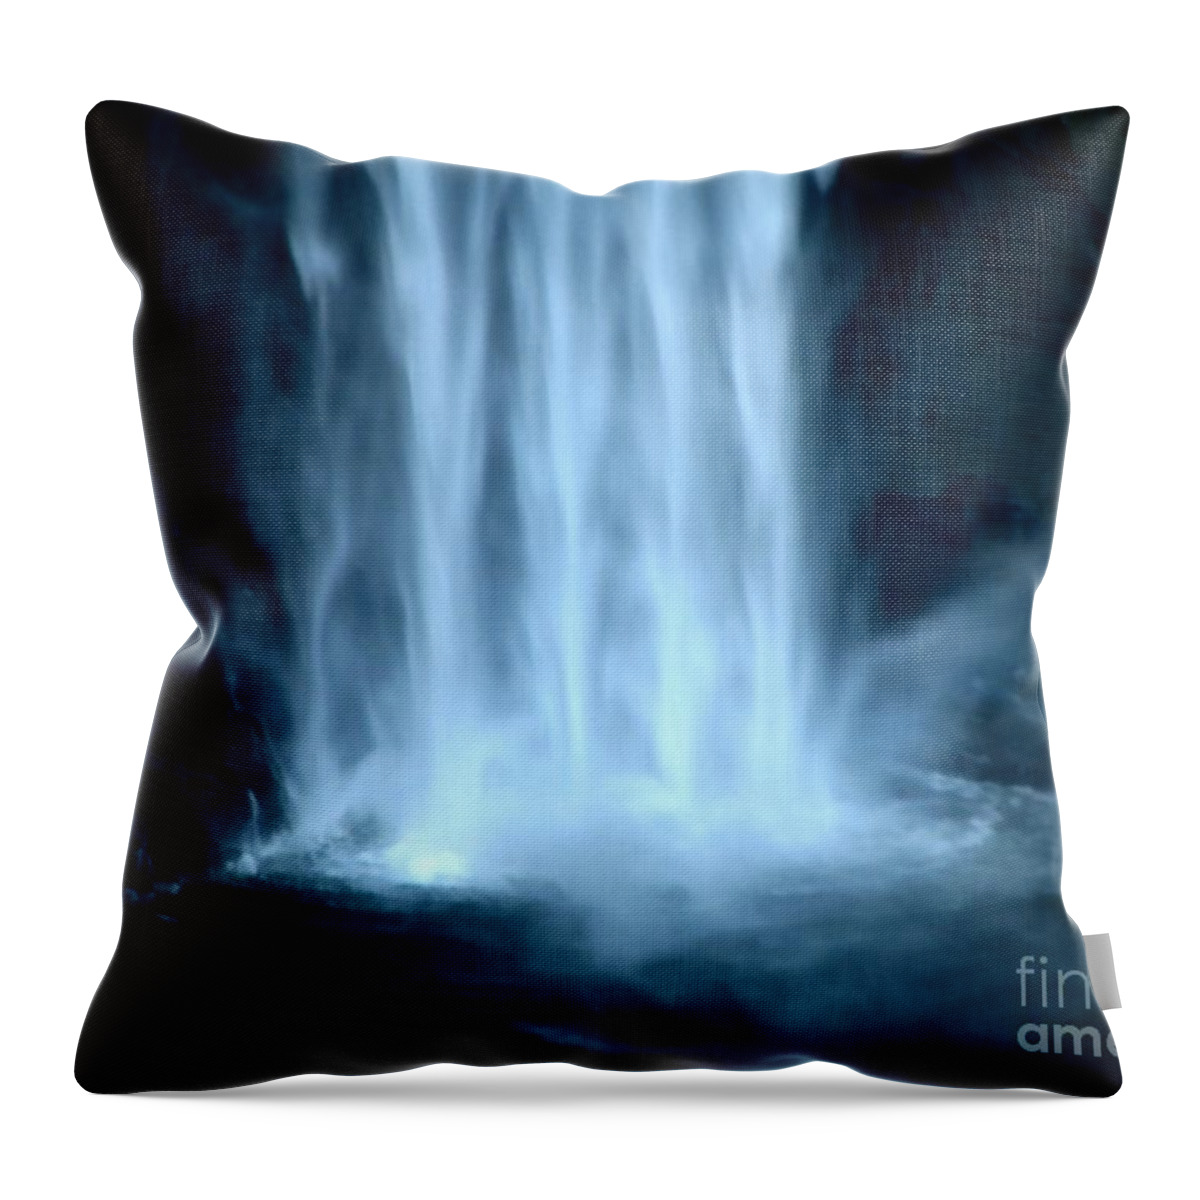 Taughannock Falls Throw Pillow featuring the photograph Taughannock Falls Closeup by Rose Santuci-Sofranko